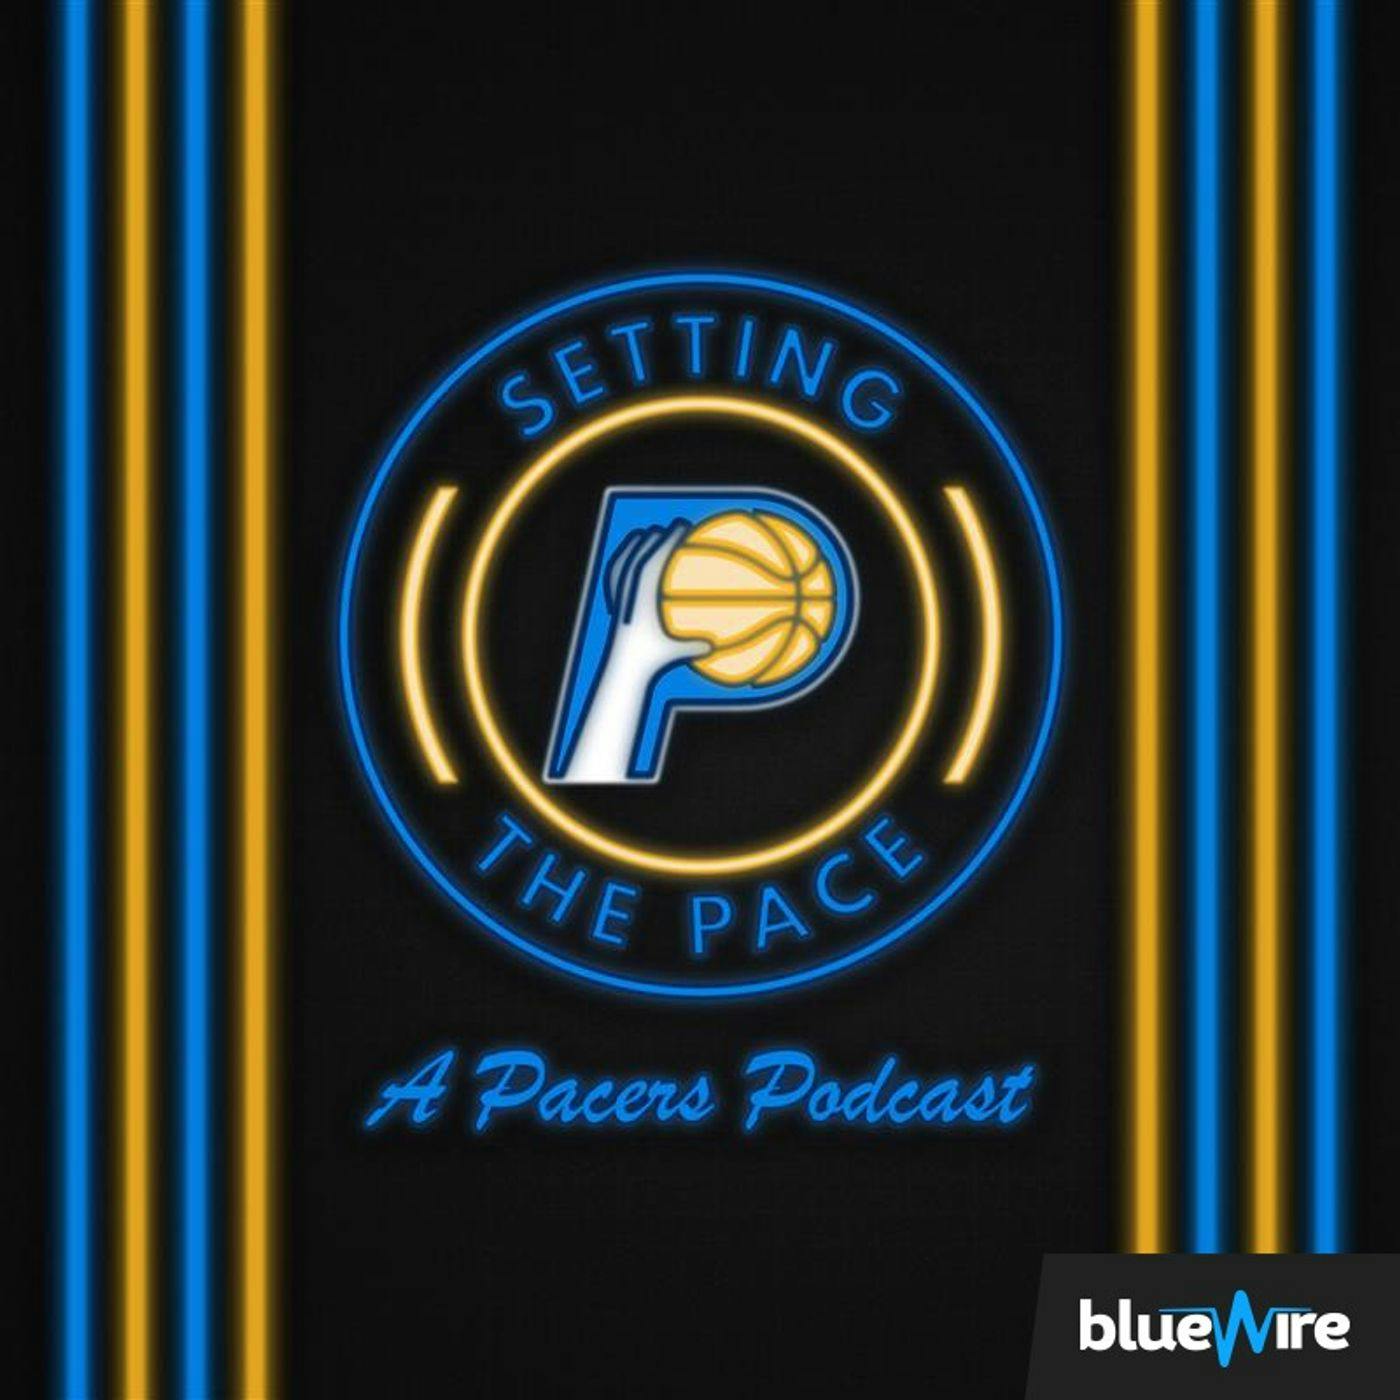 Setting The Pace podcast 